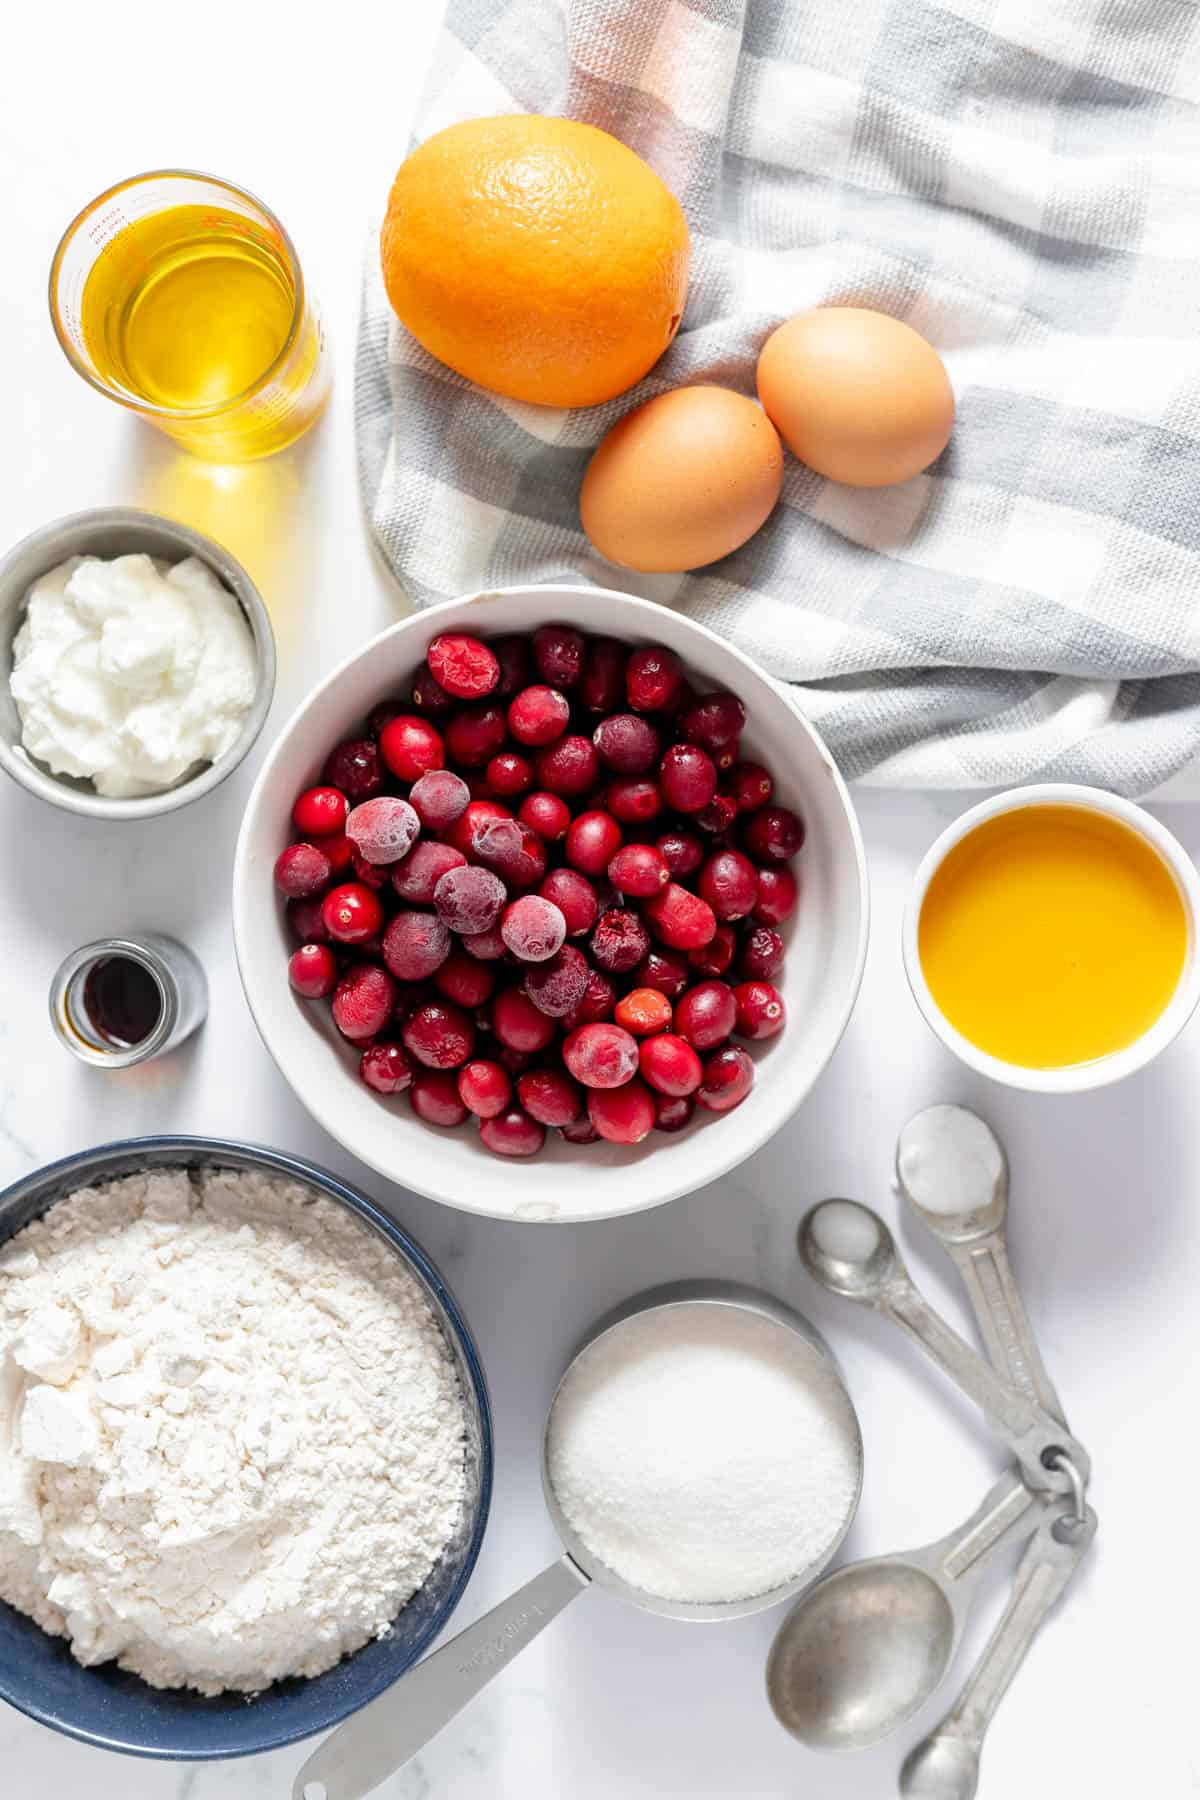 Ingredients for cranberry orange muffins in separate bowls.